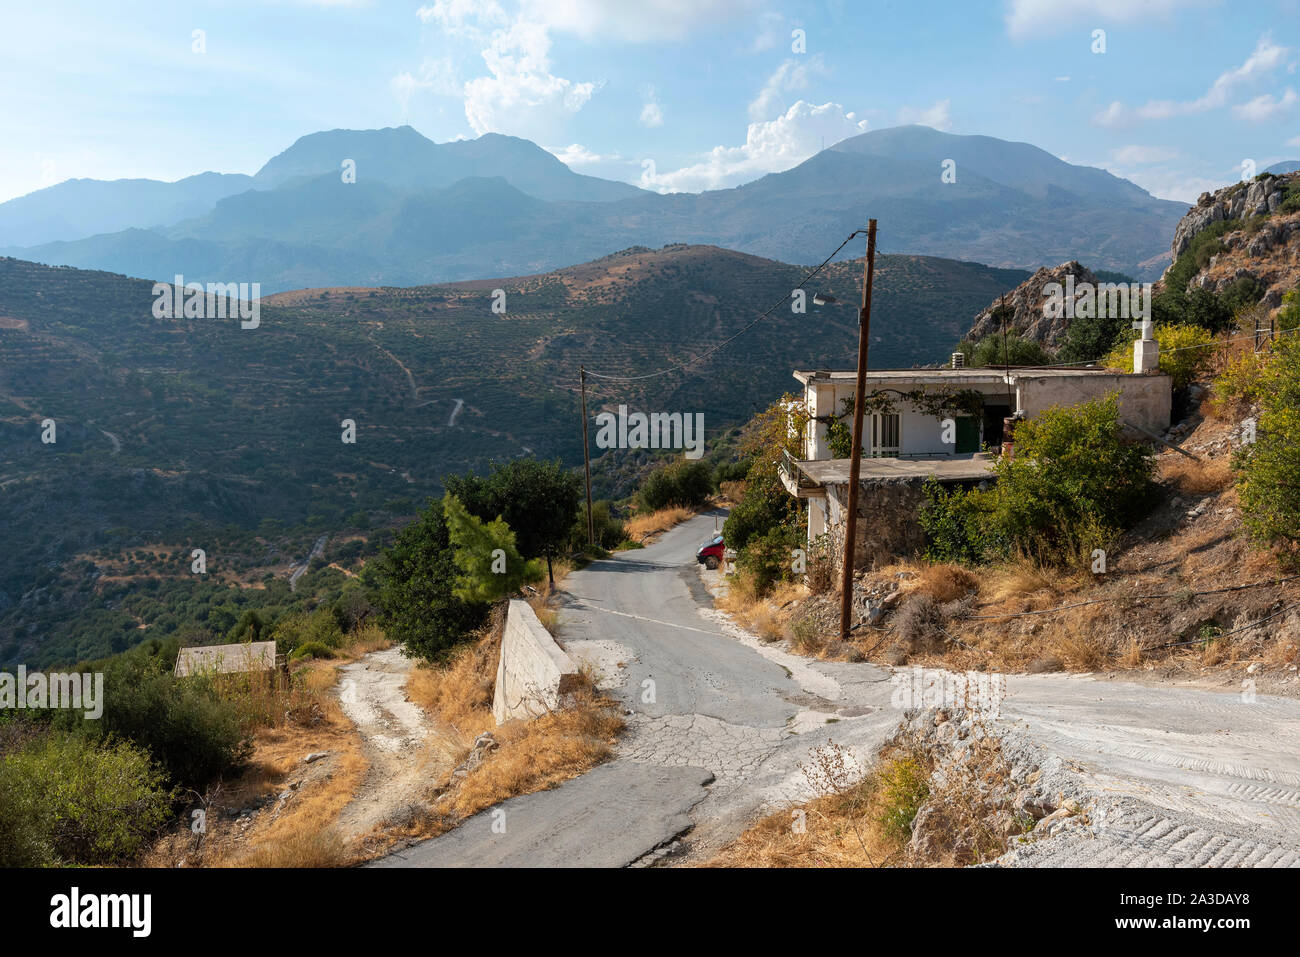 Agios Stefanos, Crete, Greece. September 2019.  Rural scenic road passing a Cretan home on the roadside in this mountainside ancient village of Agios Stock Photo